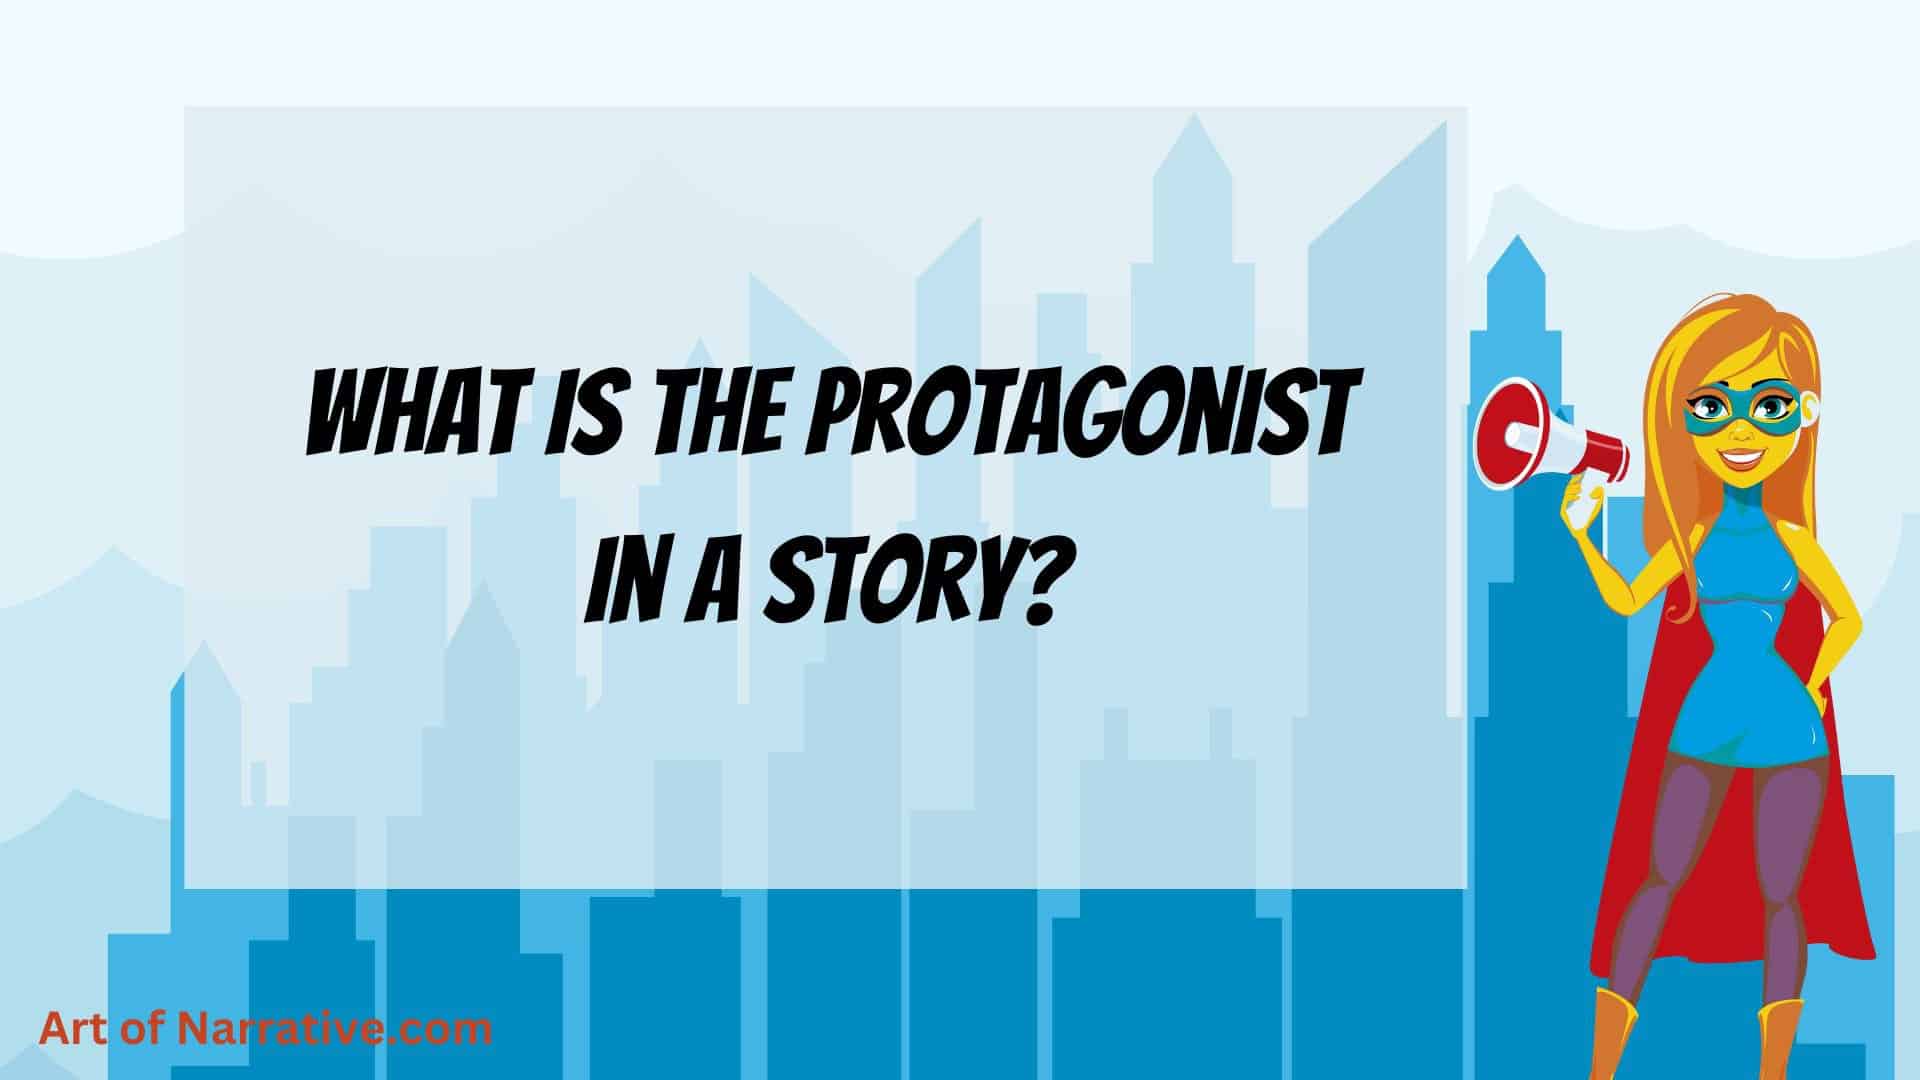 a short story protagonist